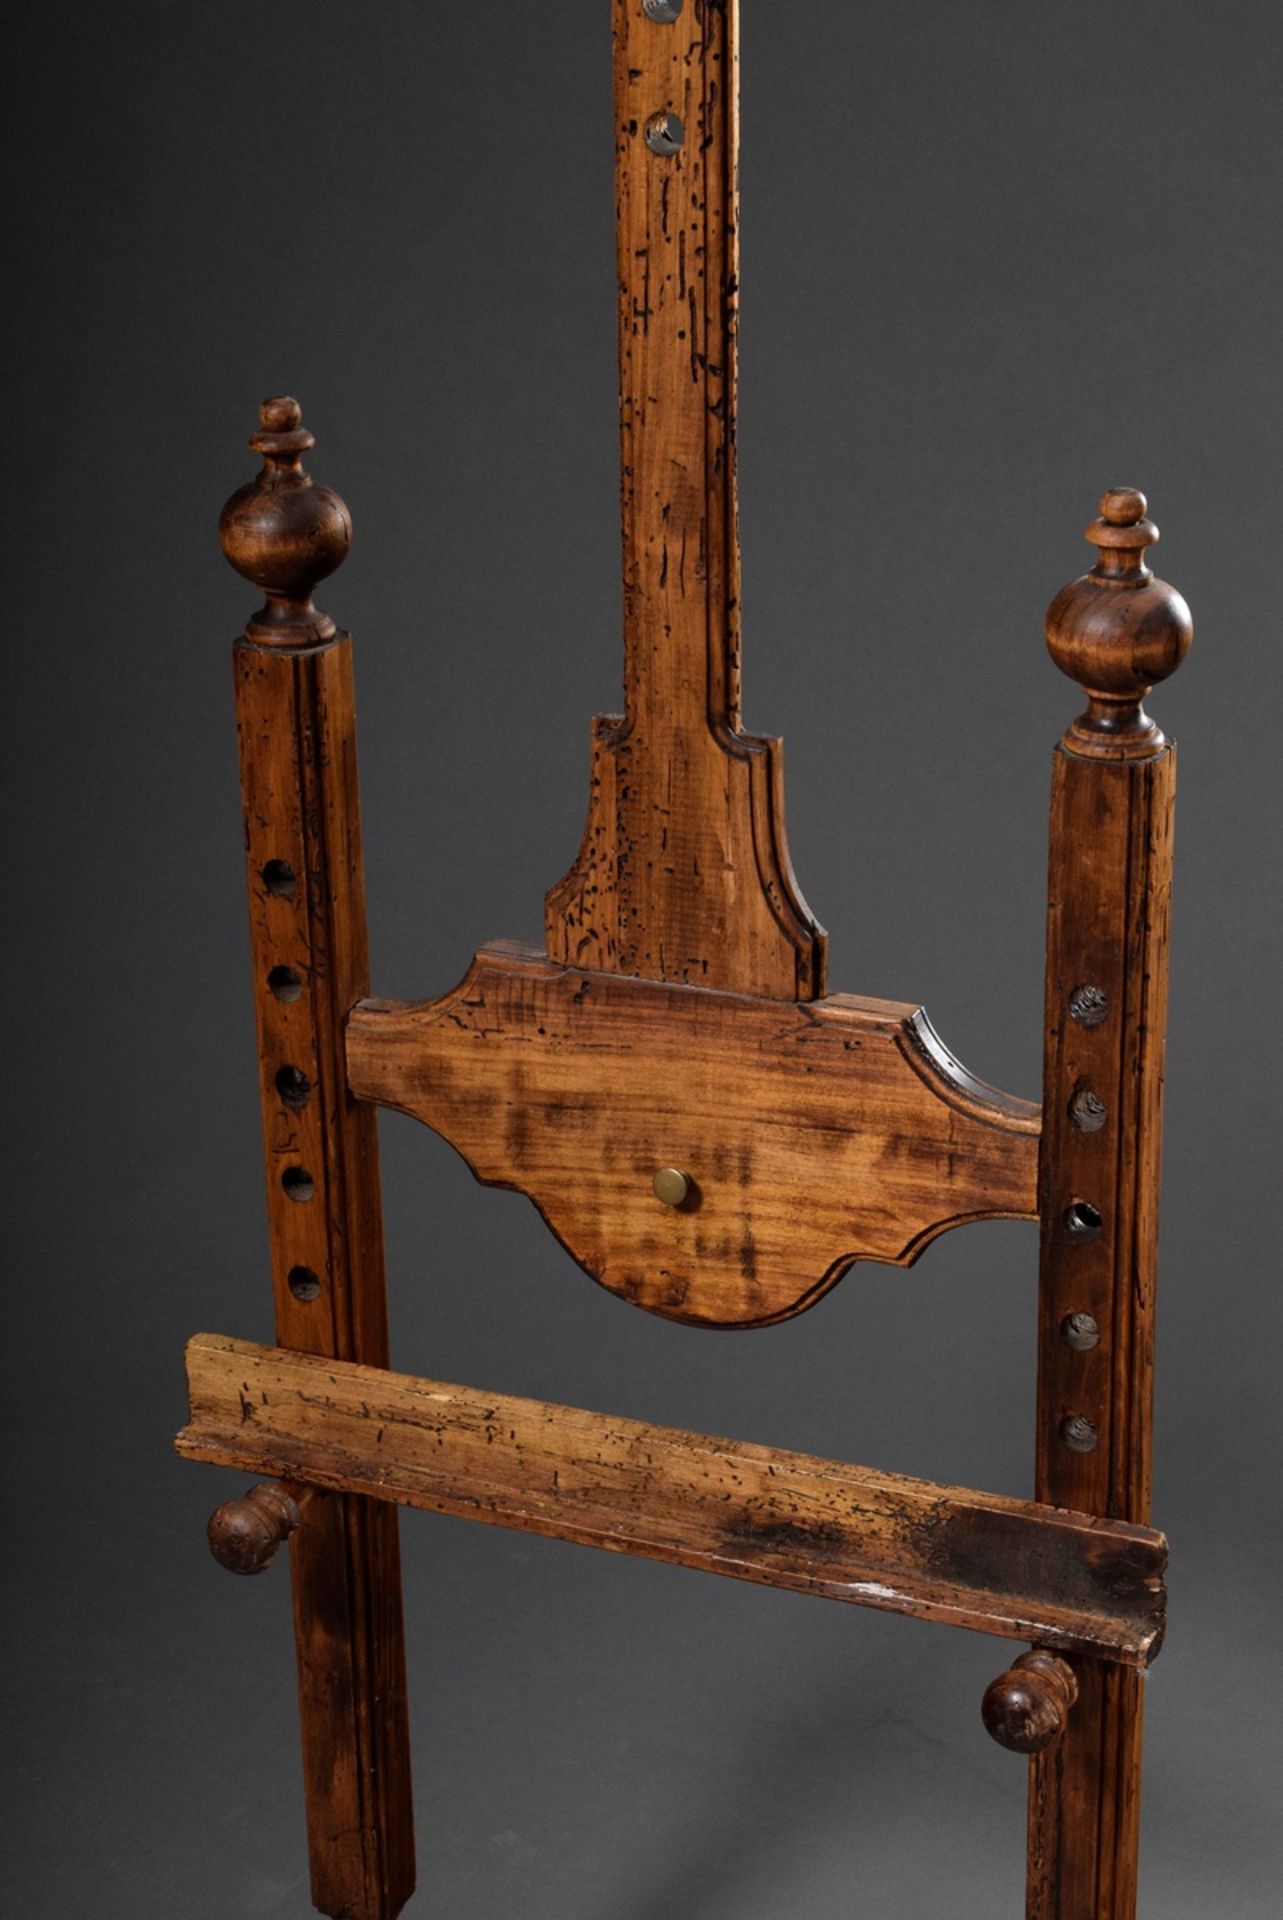 Rustic height-adjustable easel with turned balusters, softwood, 19th c., h. 180cm, old worm damage, - Image 2 of 5